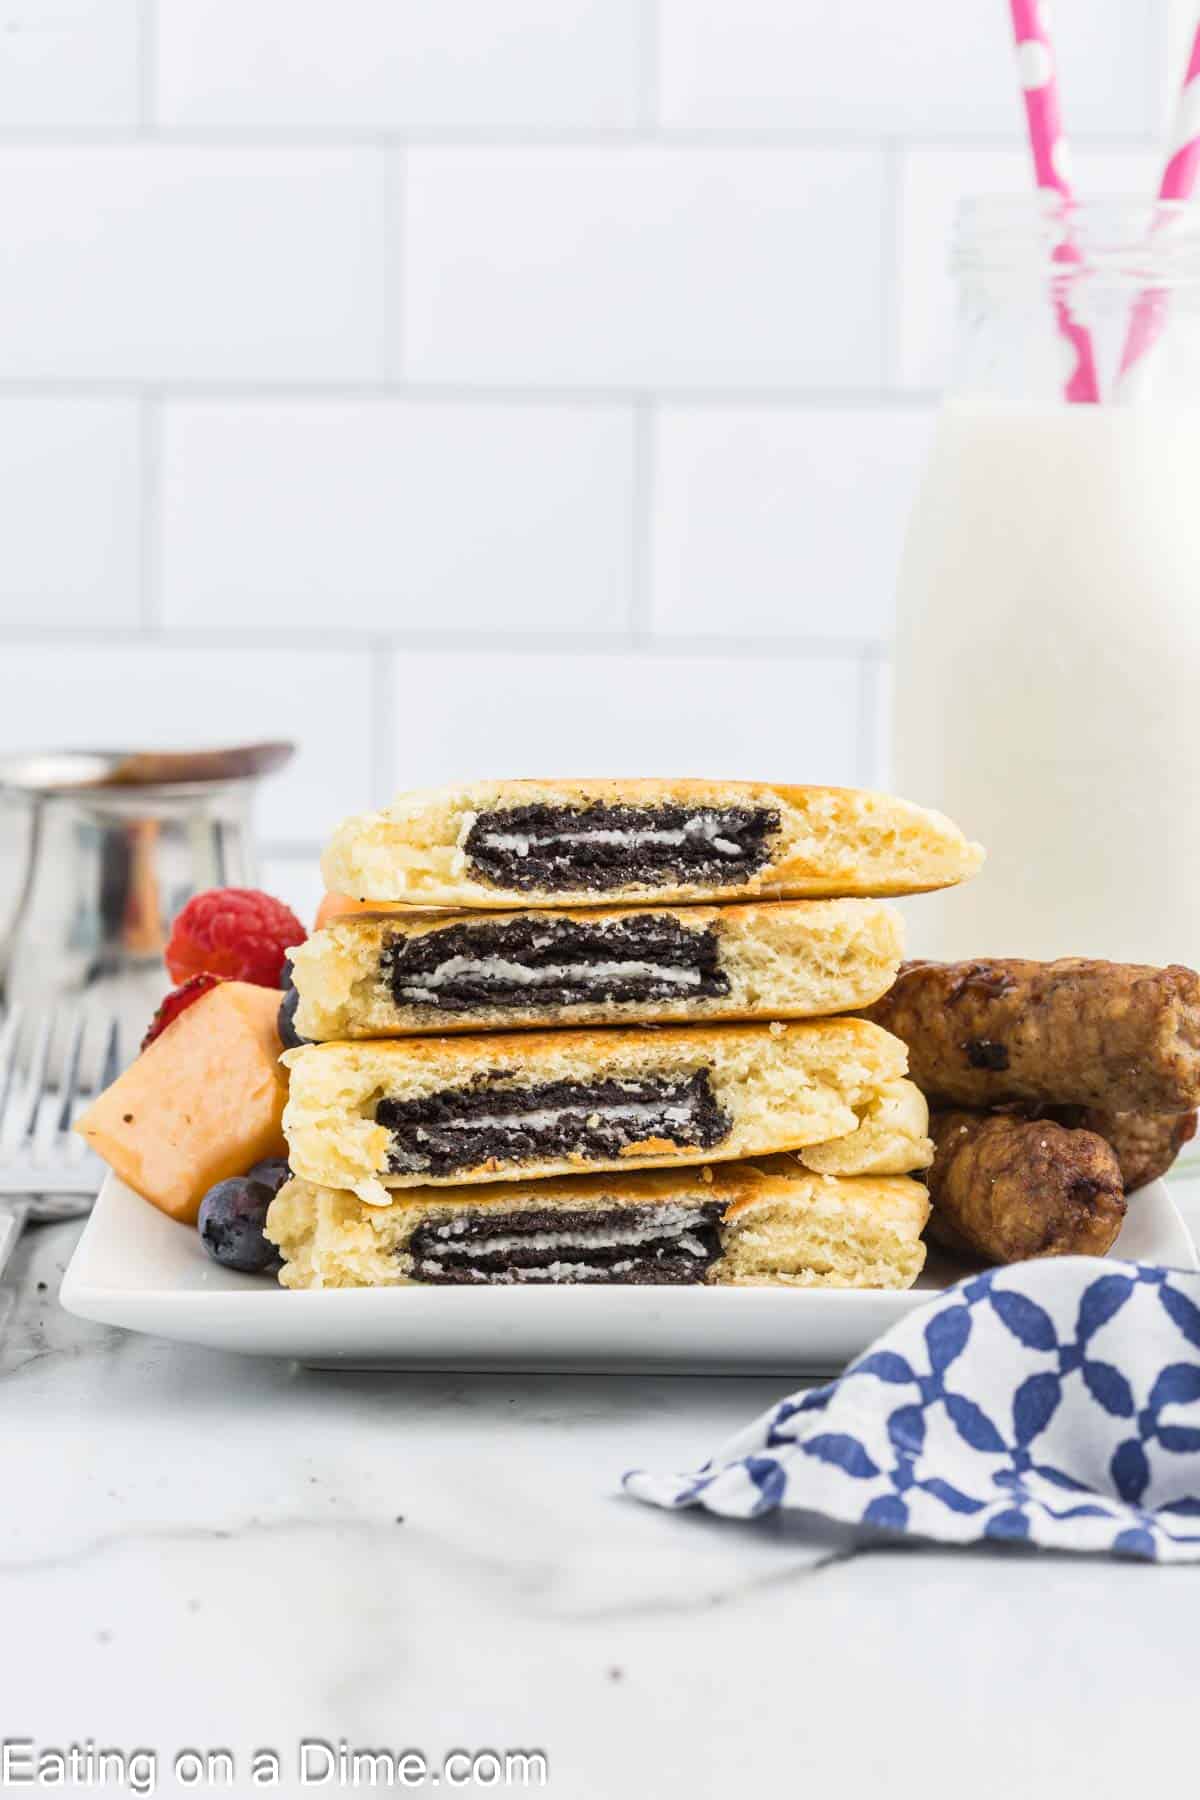 Oreo Pancakes stacked cut in half so you can see the Oreo cookies in the pancakes with a side of sausage links and fresh fruit